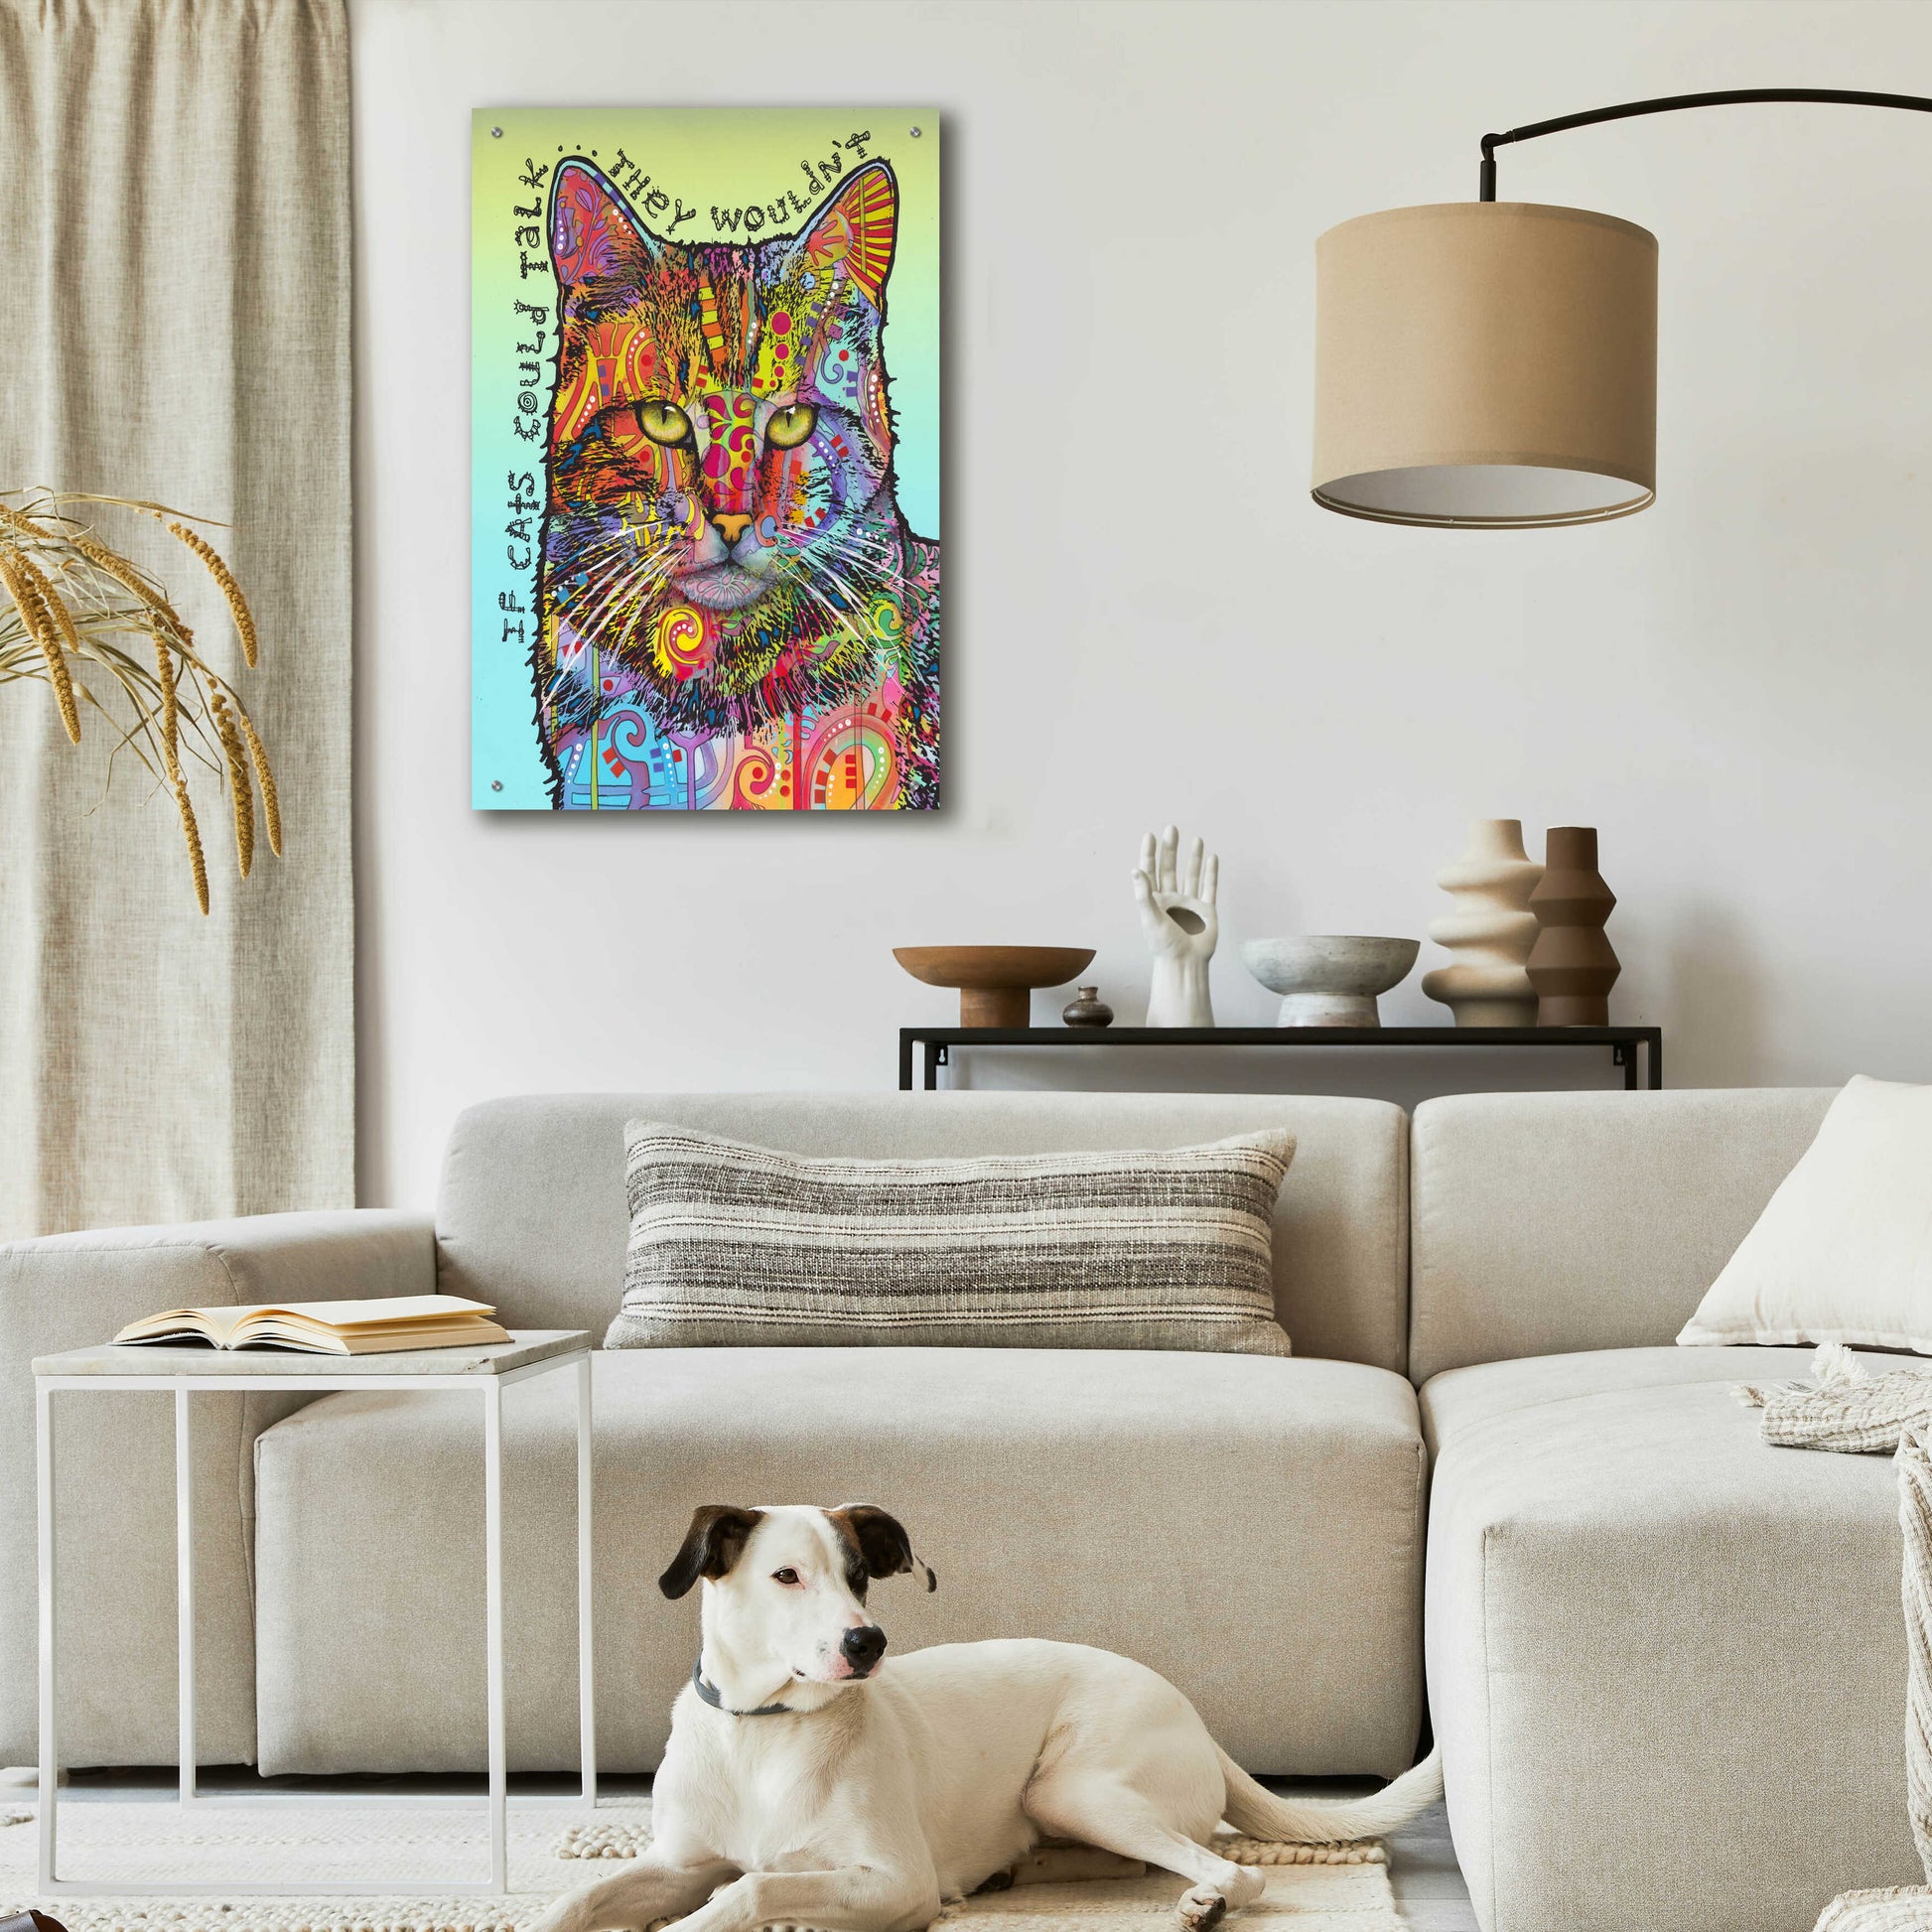 Epic Art 'If Cats Could Talk' by Dean Russo, Acrylic Glass Wall Art,24x36